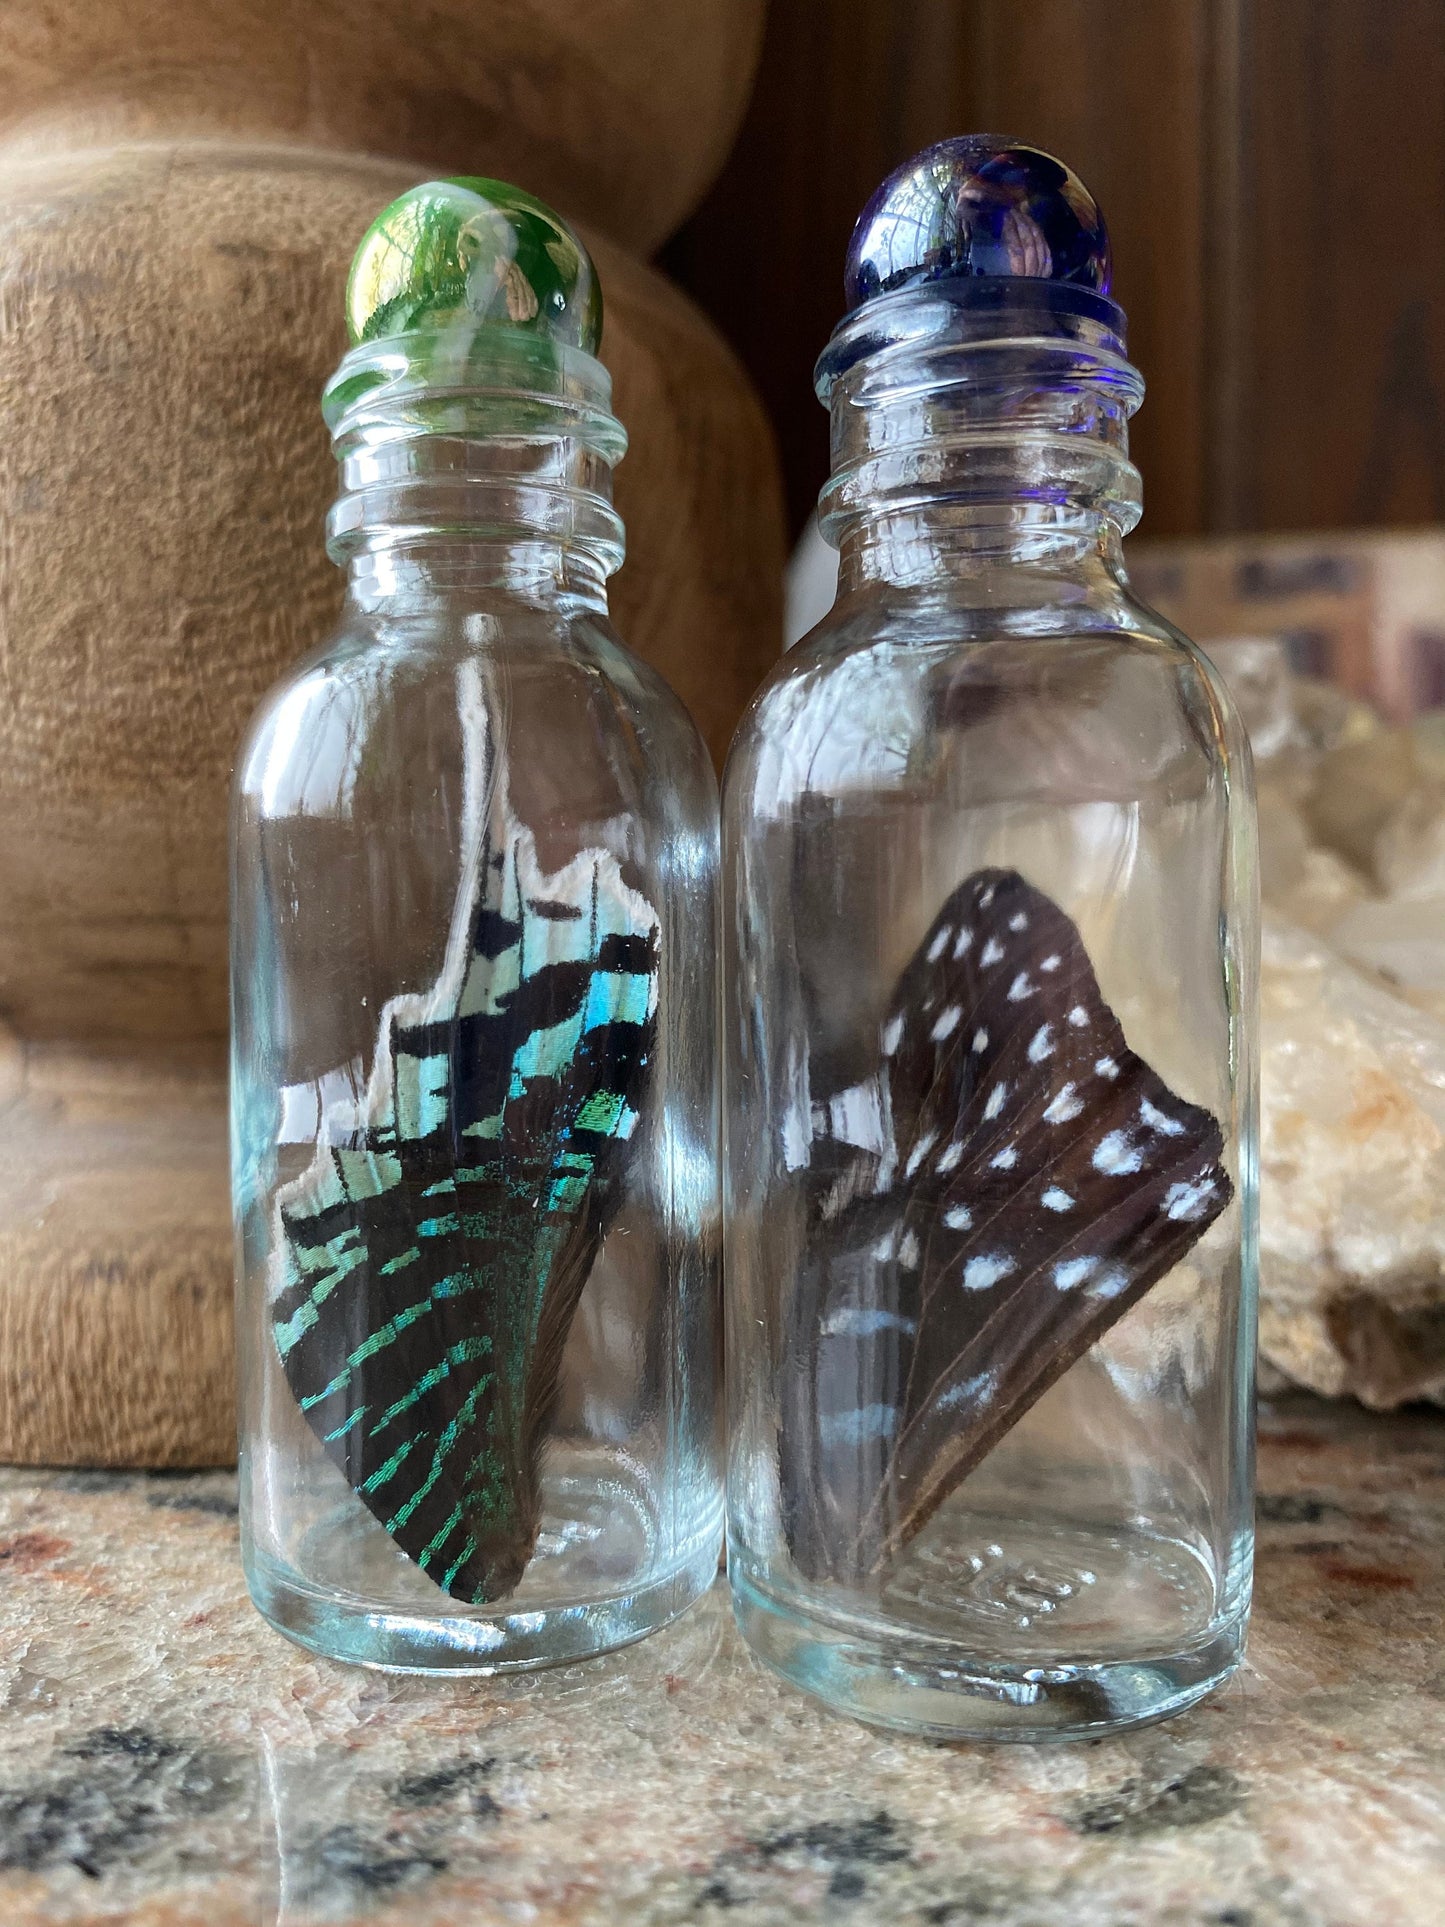 Real Butterfly Wing in Bottle Large Specimen Jar ethically sourced Funds Conservation